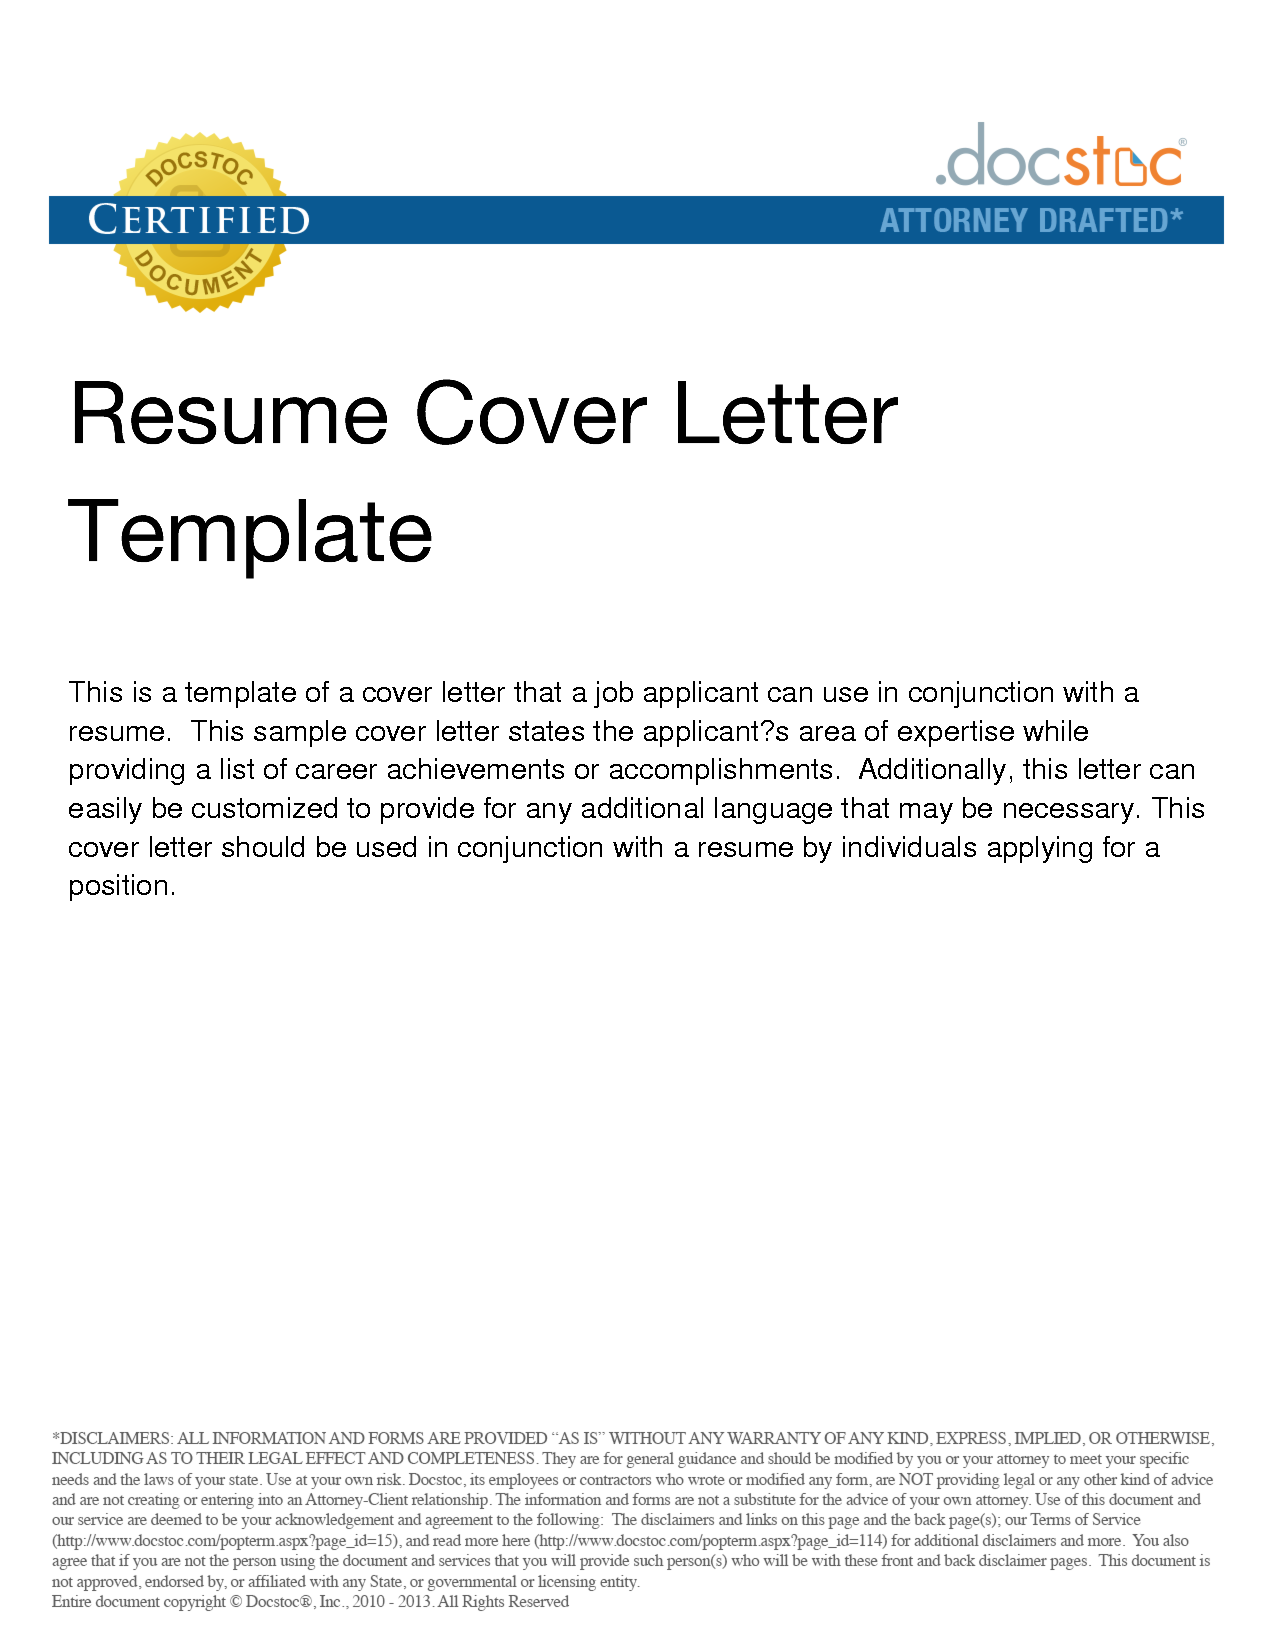 Cover letter closing paragraph examples